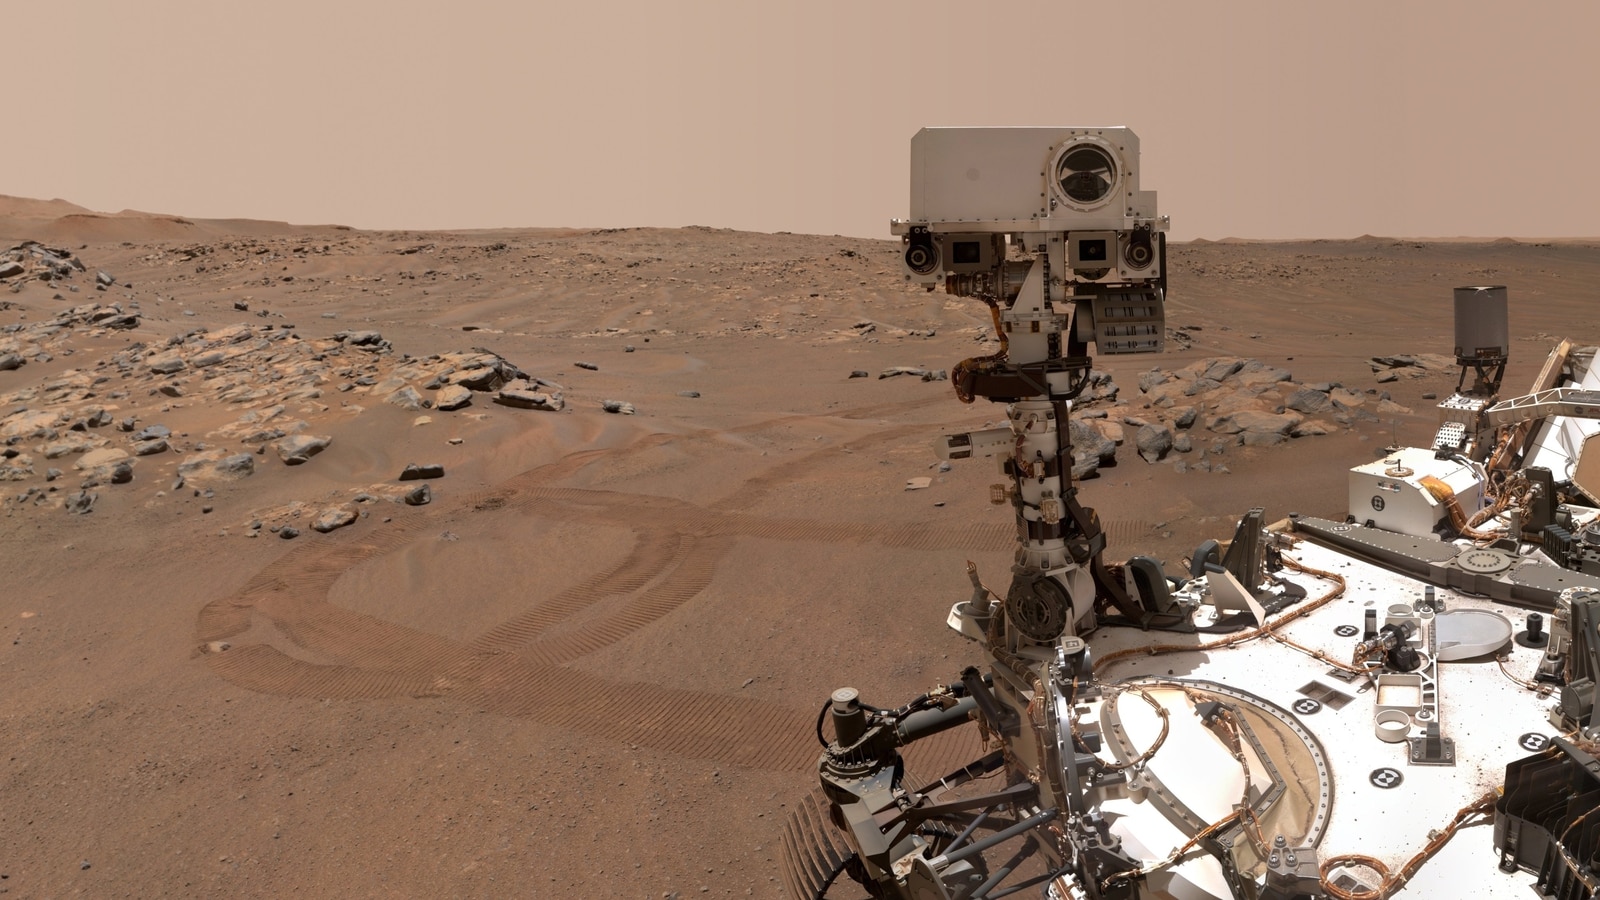 Read more about the article 50 years of robotic exploration left over 7000kg of trash on Mars: Study